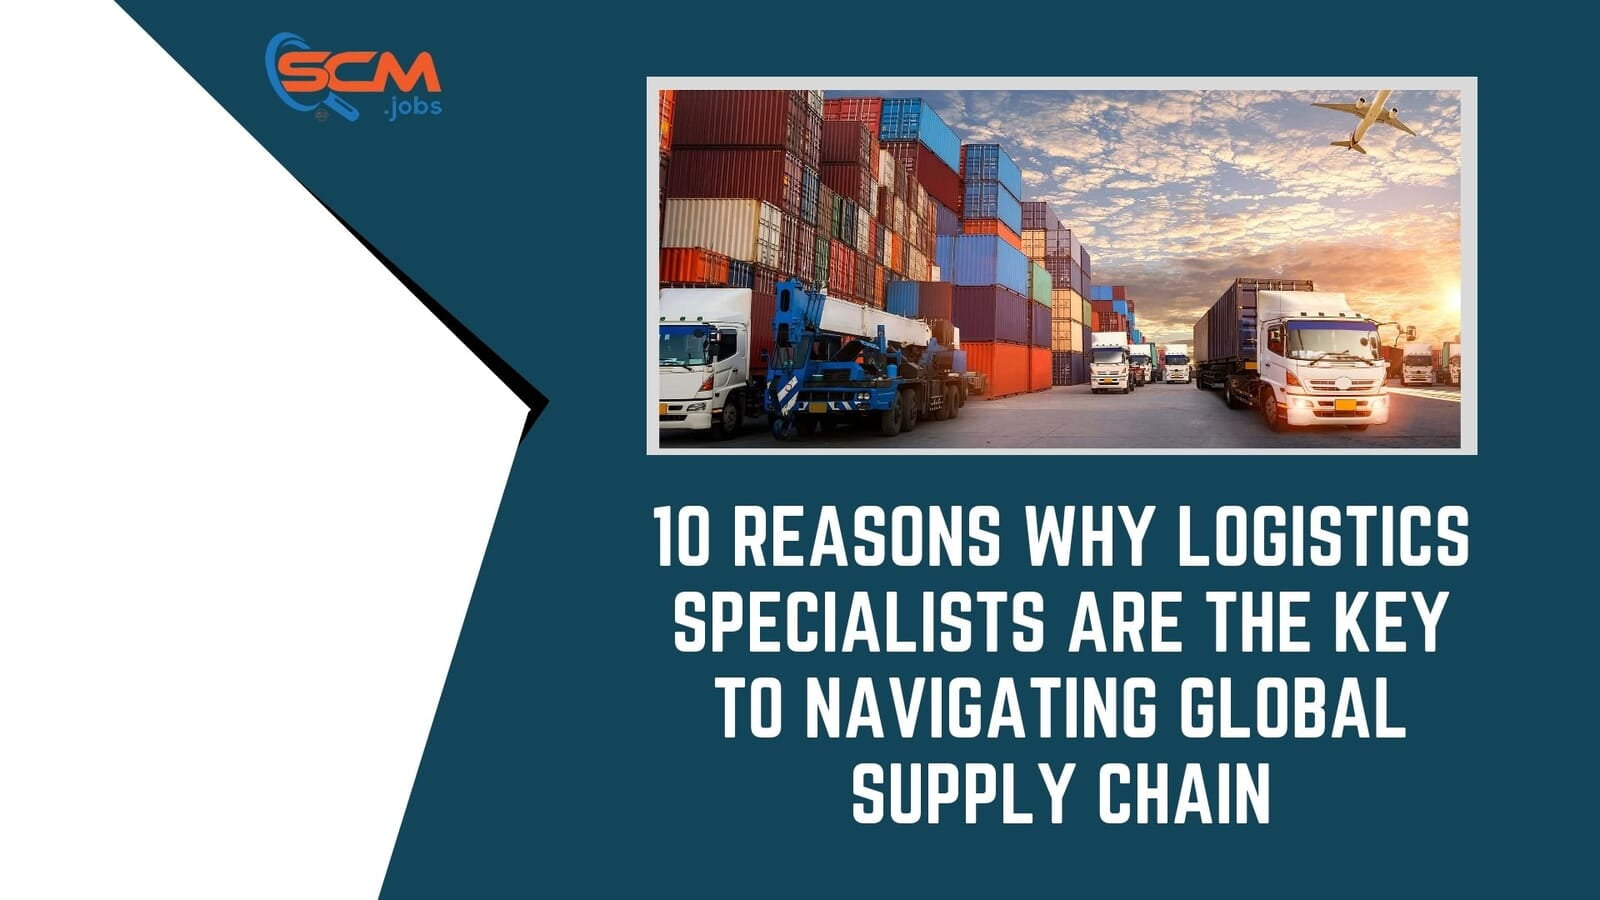 10 Reasons Why Logistics Specialists Are the Key to Navigating Global Supply Chain Disruptions